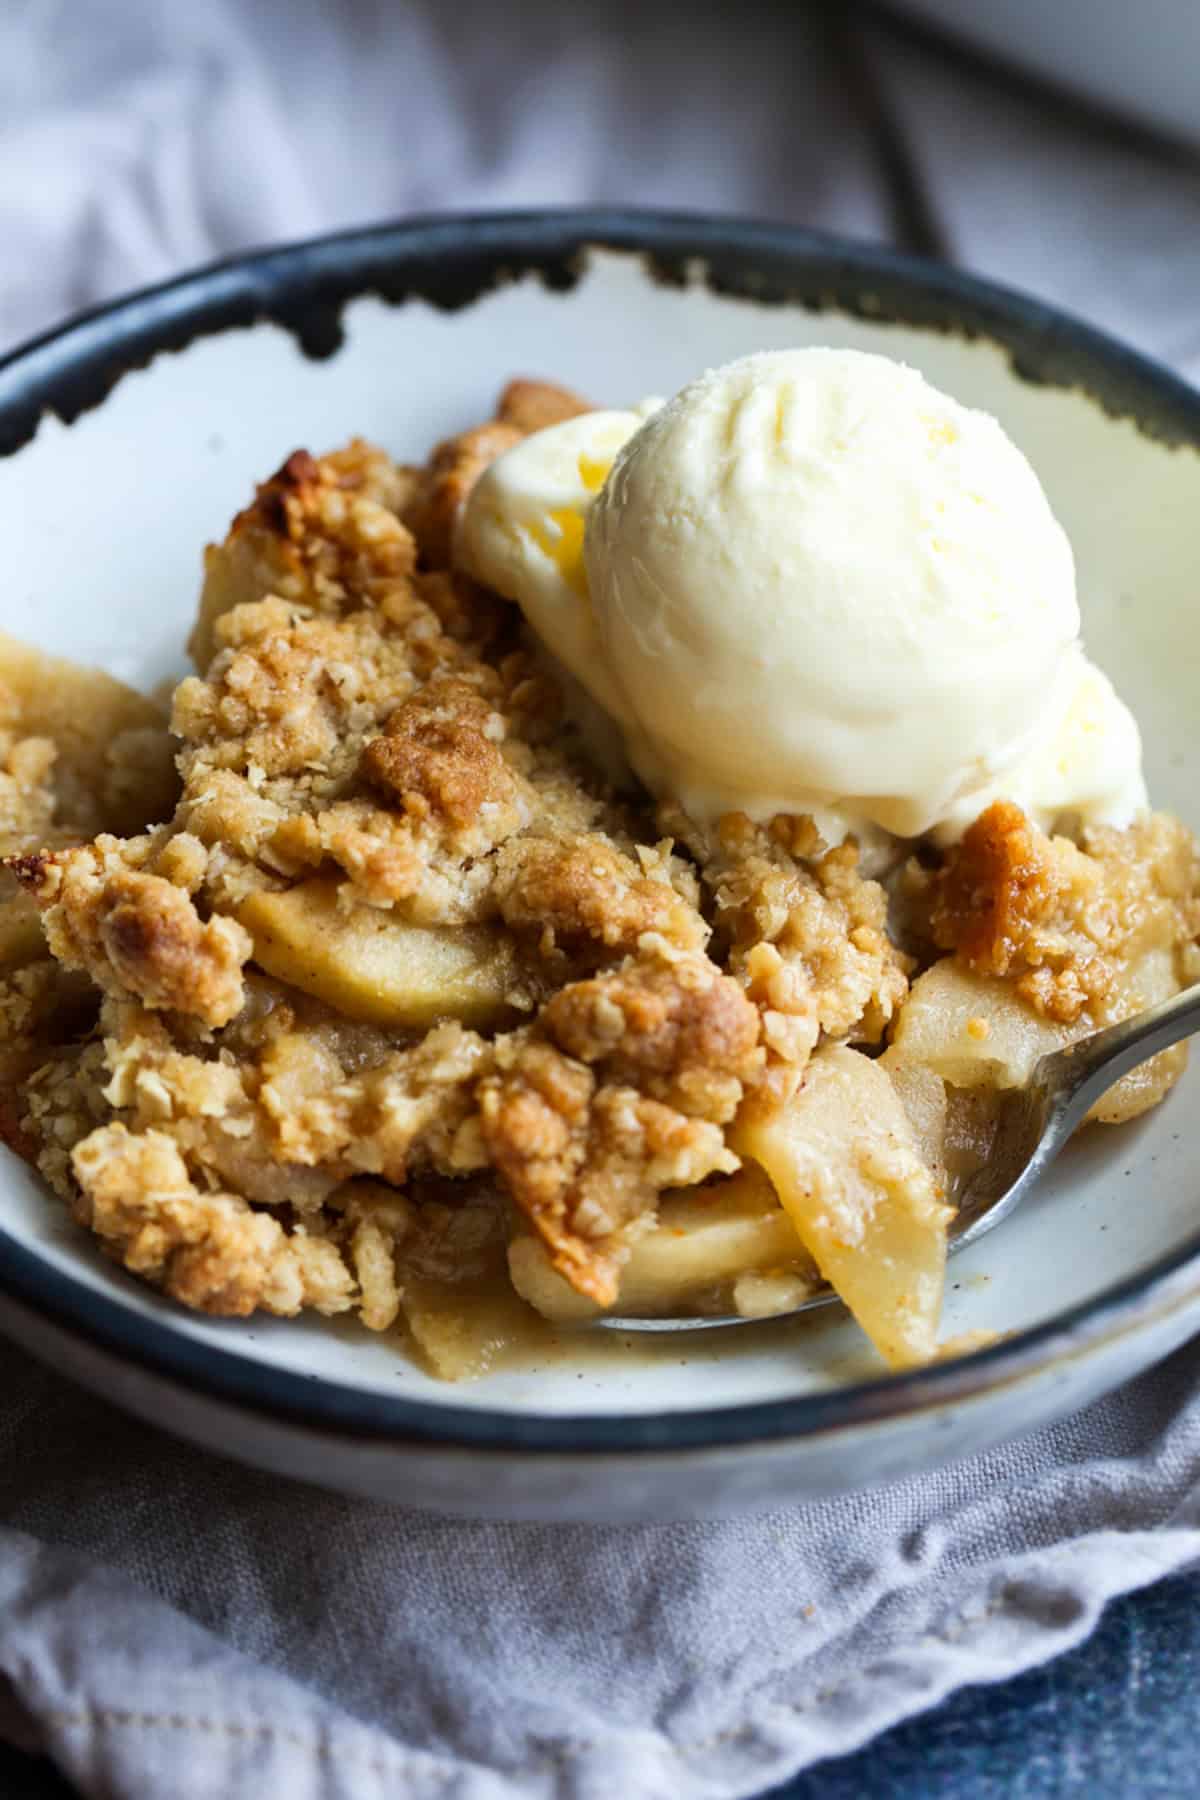 Apple crisp served in a ceramic bowl with a scoop of ice cream